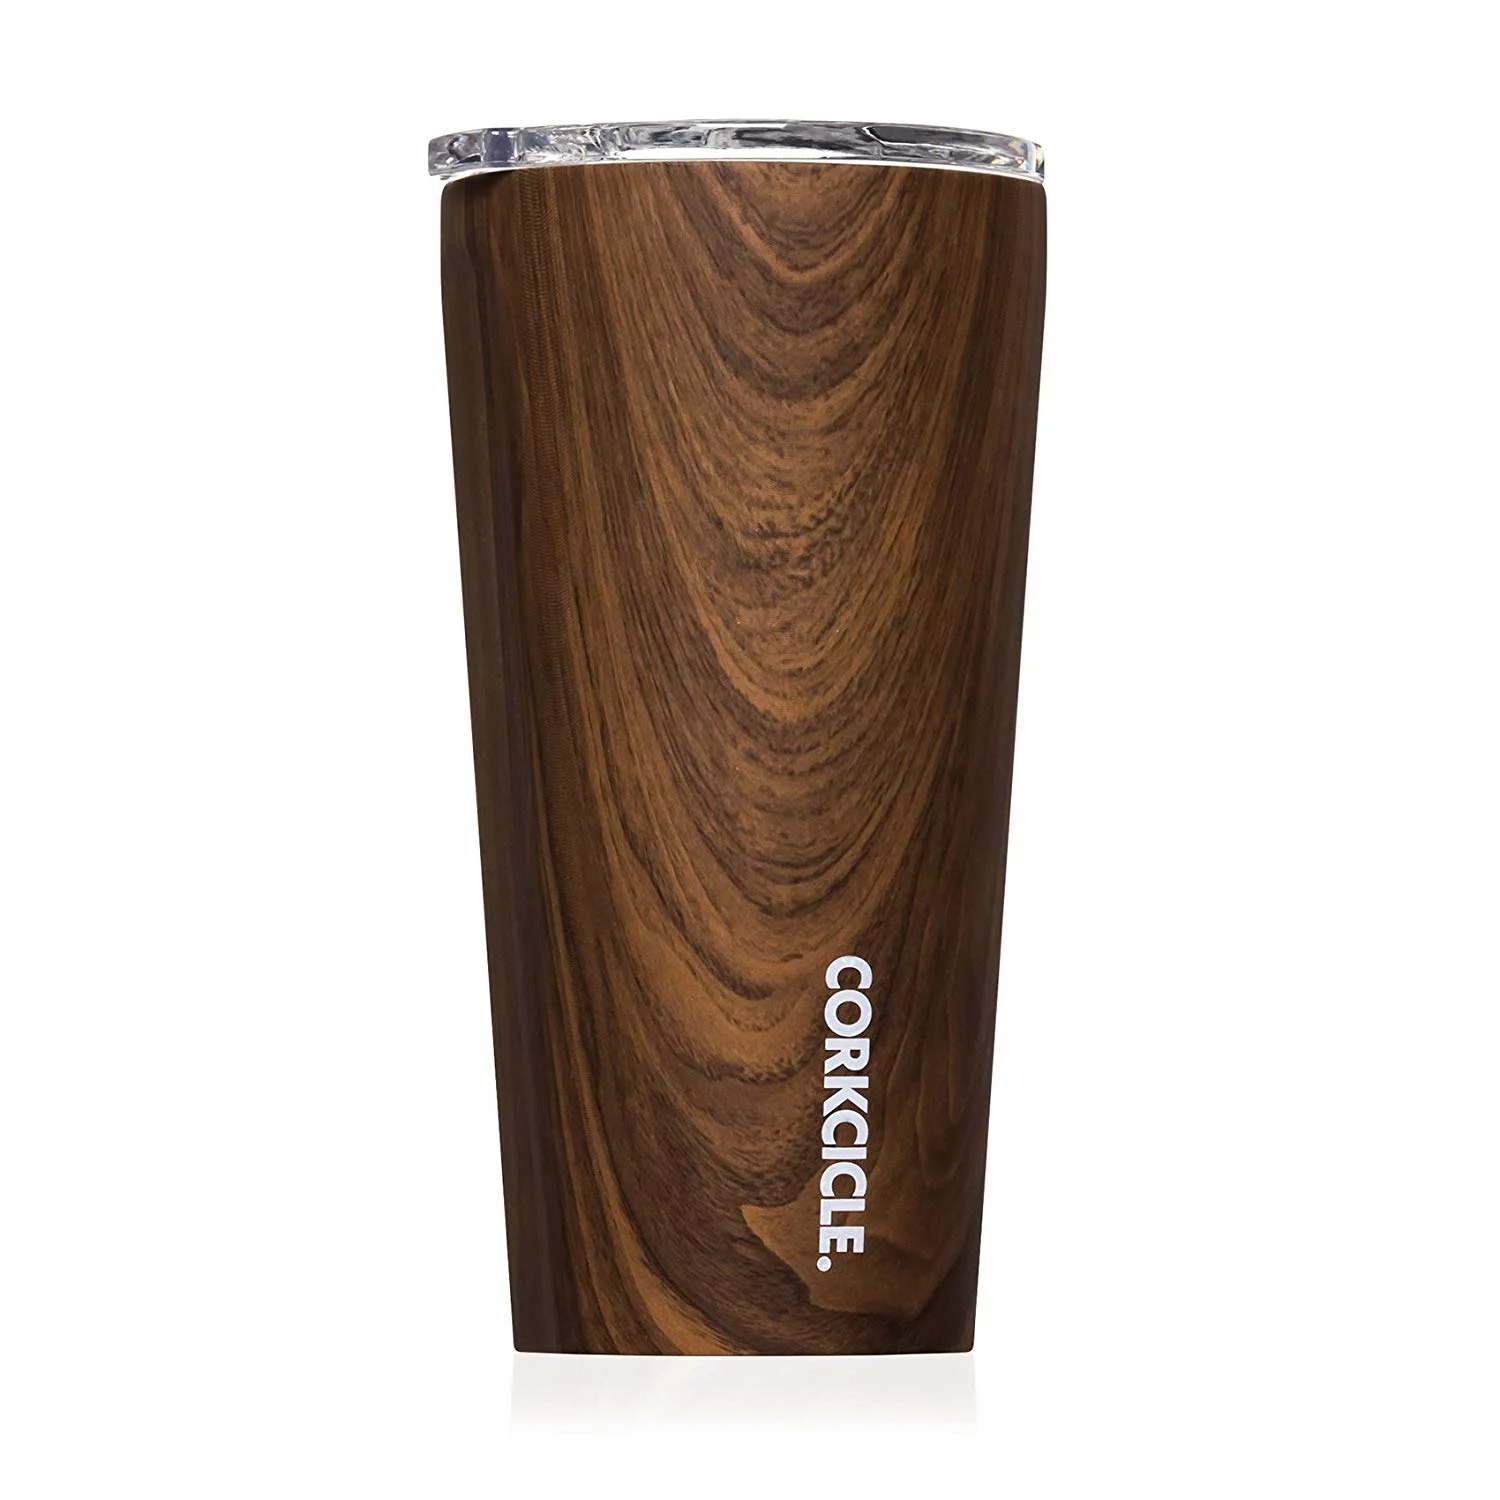 Best Coworker Gifts 2022: Corkcicle Walnut Wood Travel Tumbler for Boss 2022